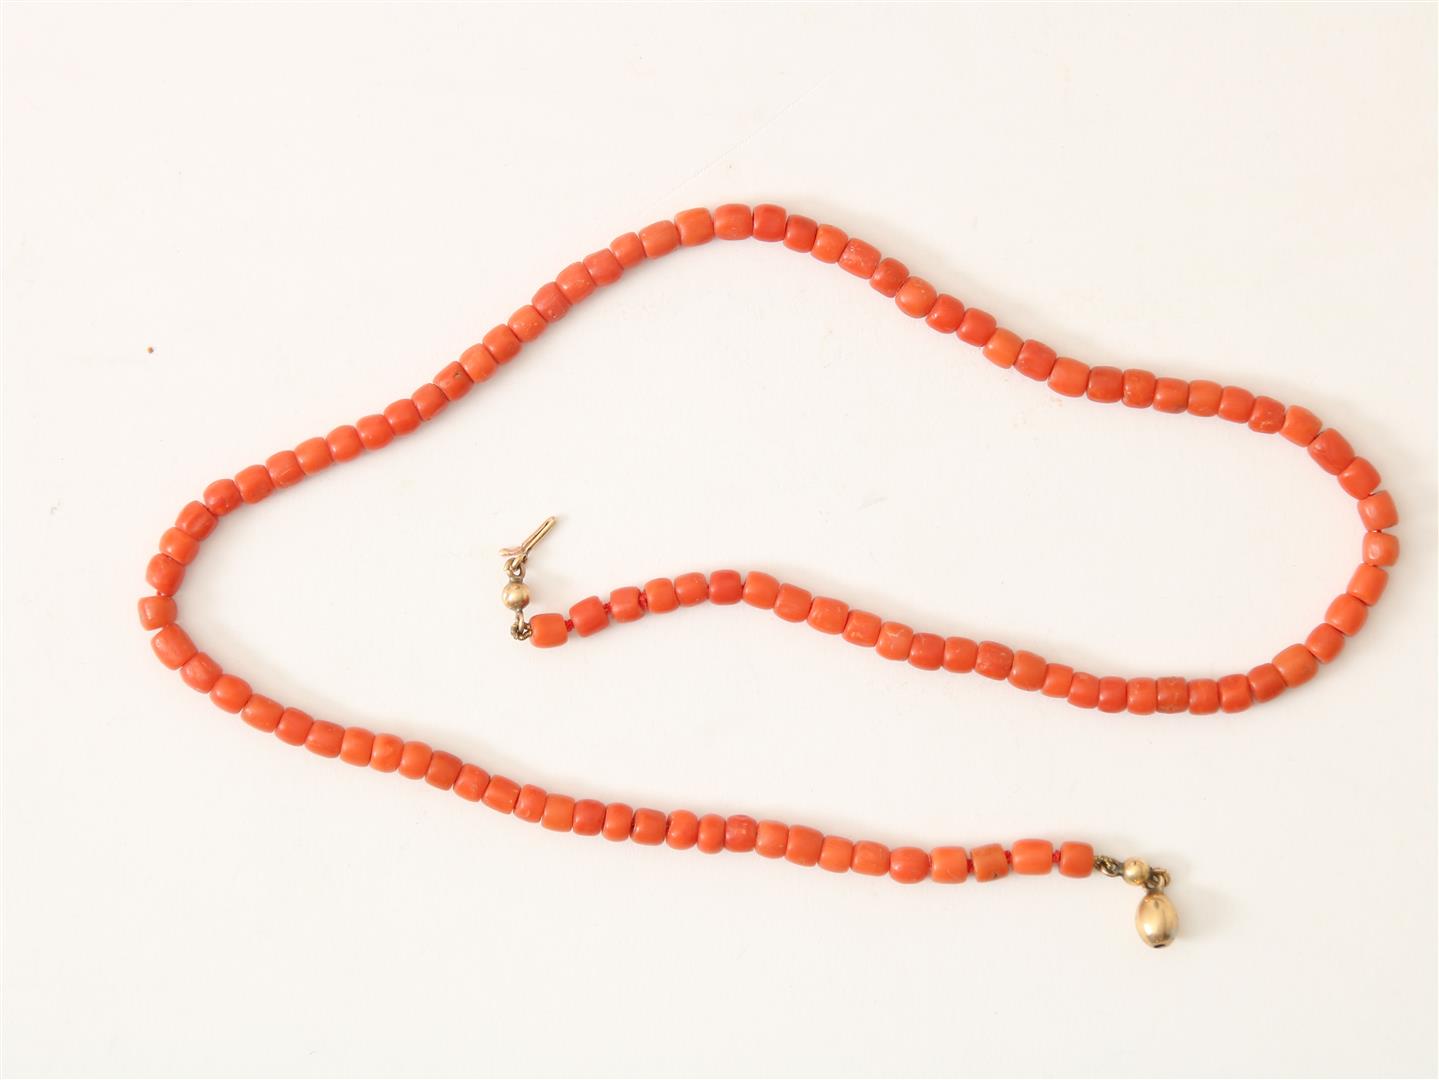 Red coral necklace on gold barrel clasp, l. 50 cm. - Image 2 of 3